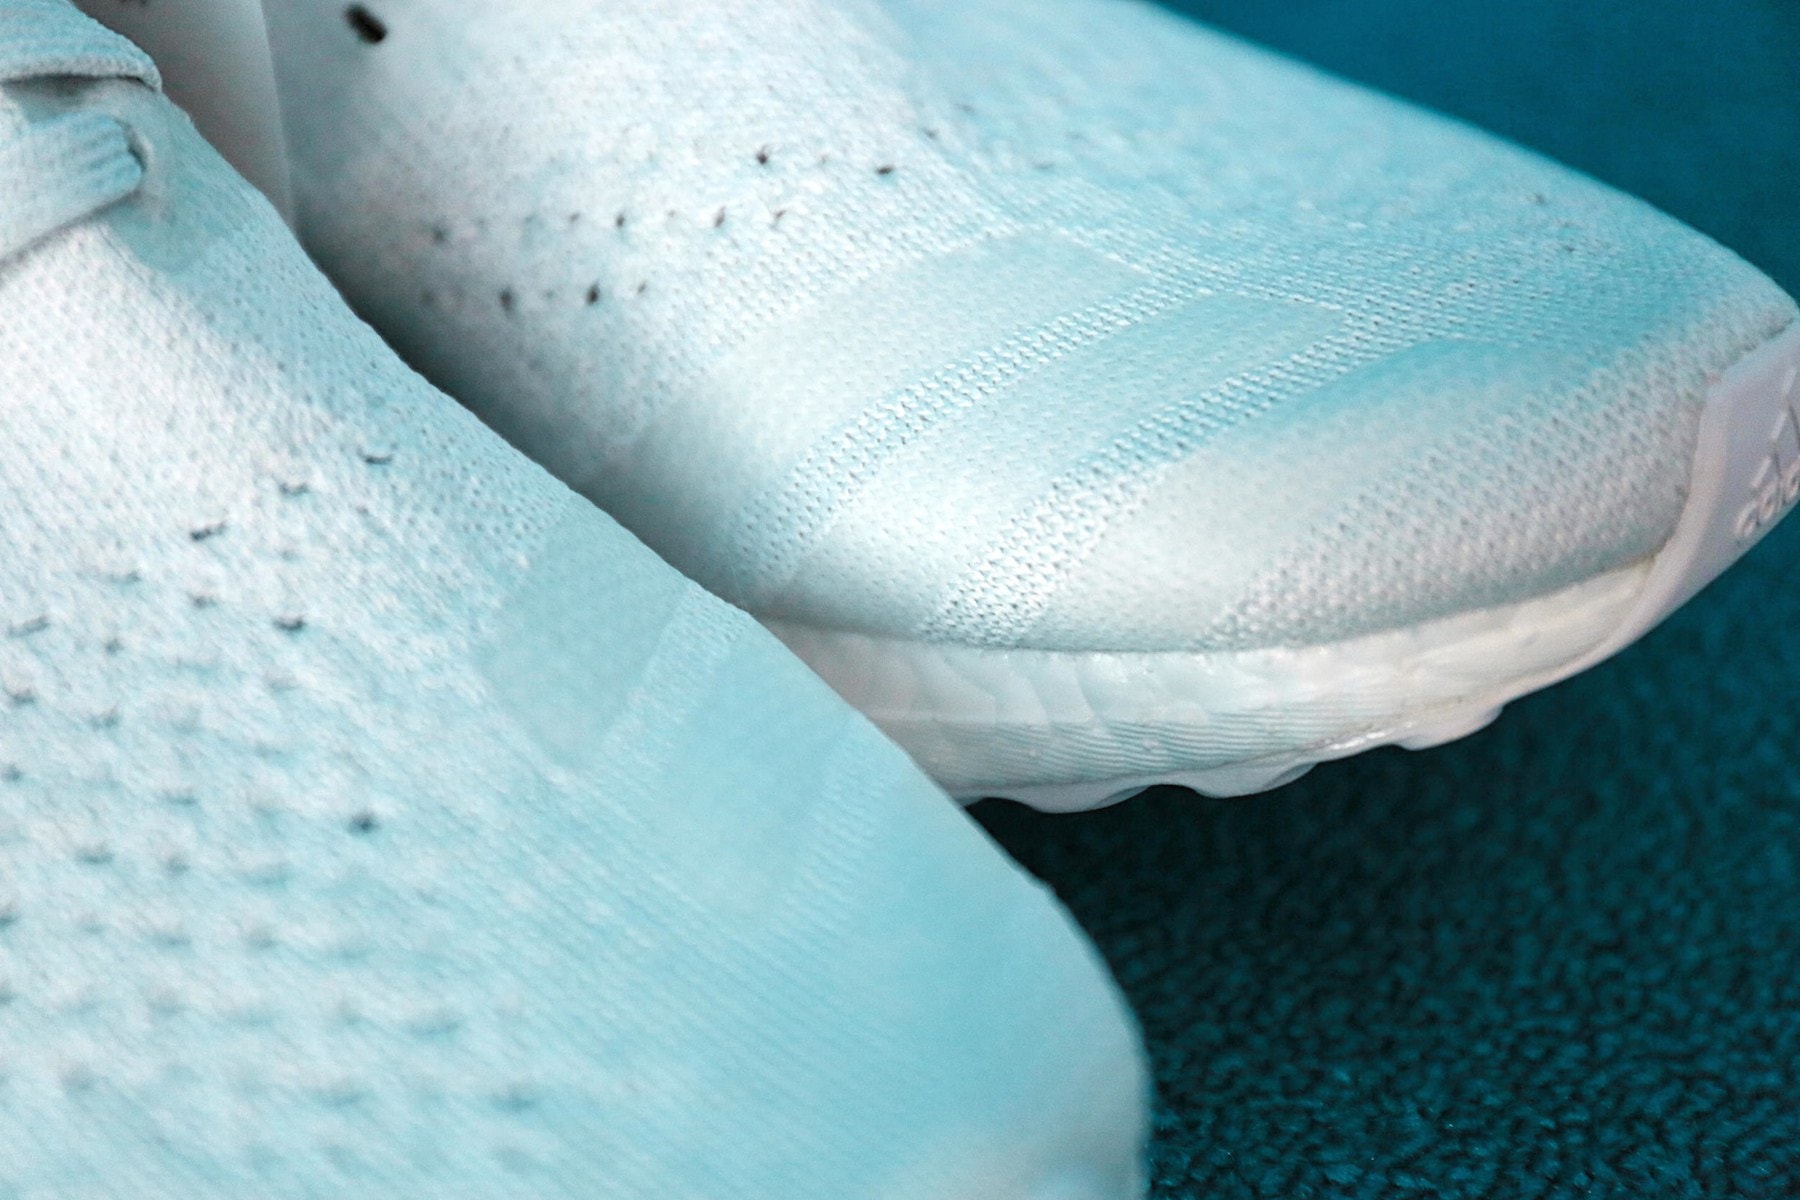 adidas x Parley Ocean UltraBOOST Uncaged A Closer Look Three Stripes Sneakers White BOOST midsole Teal World Ocean's Day